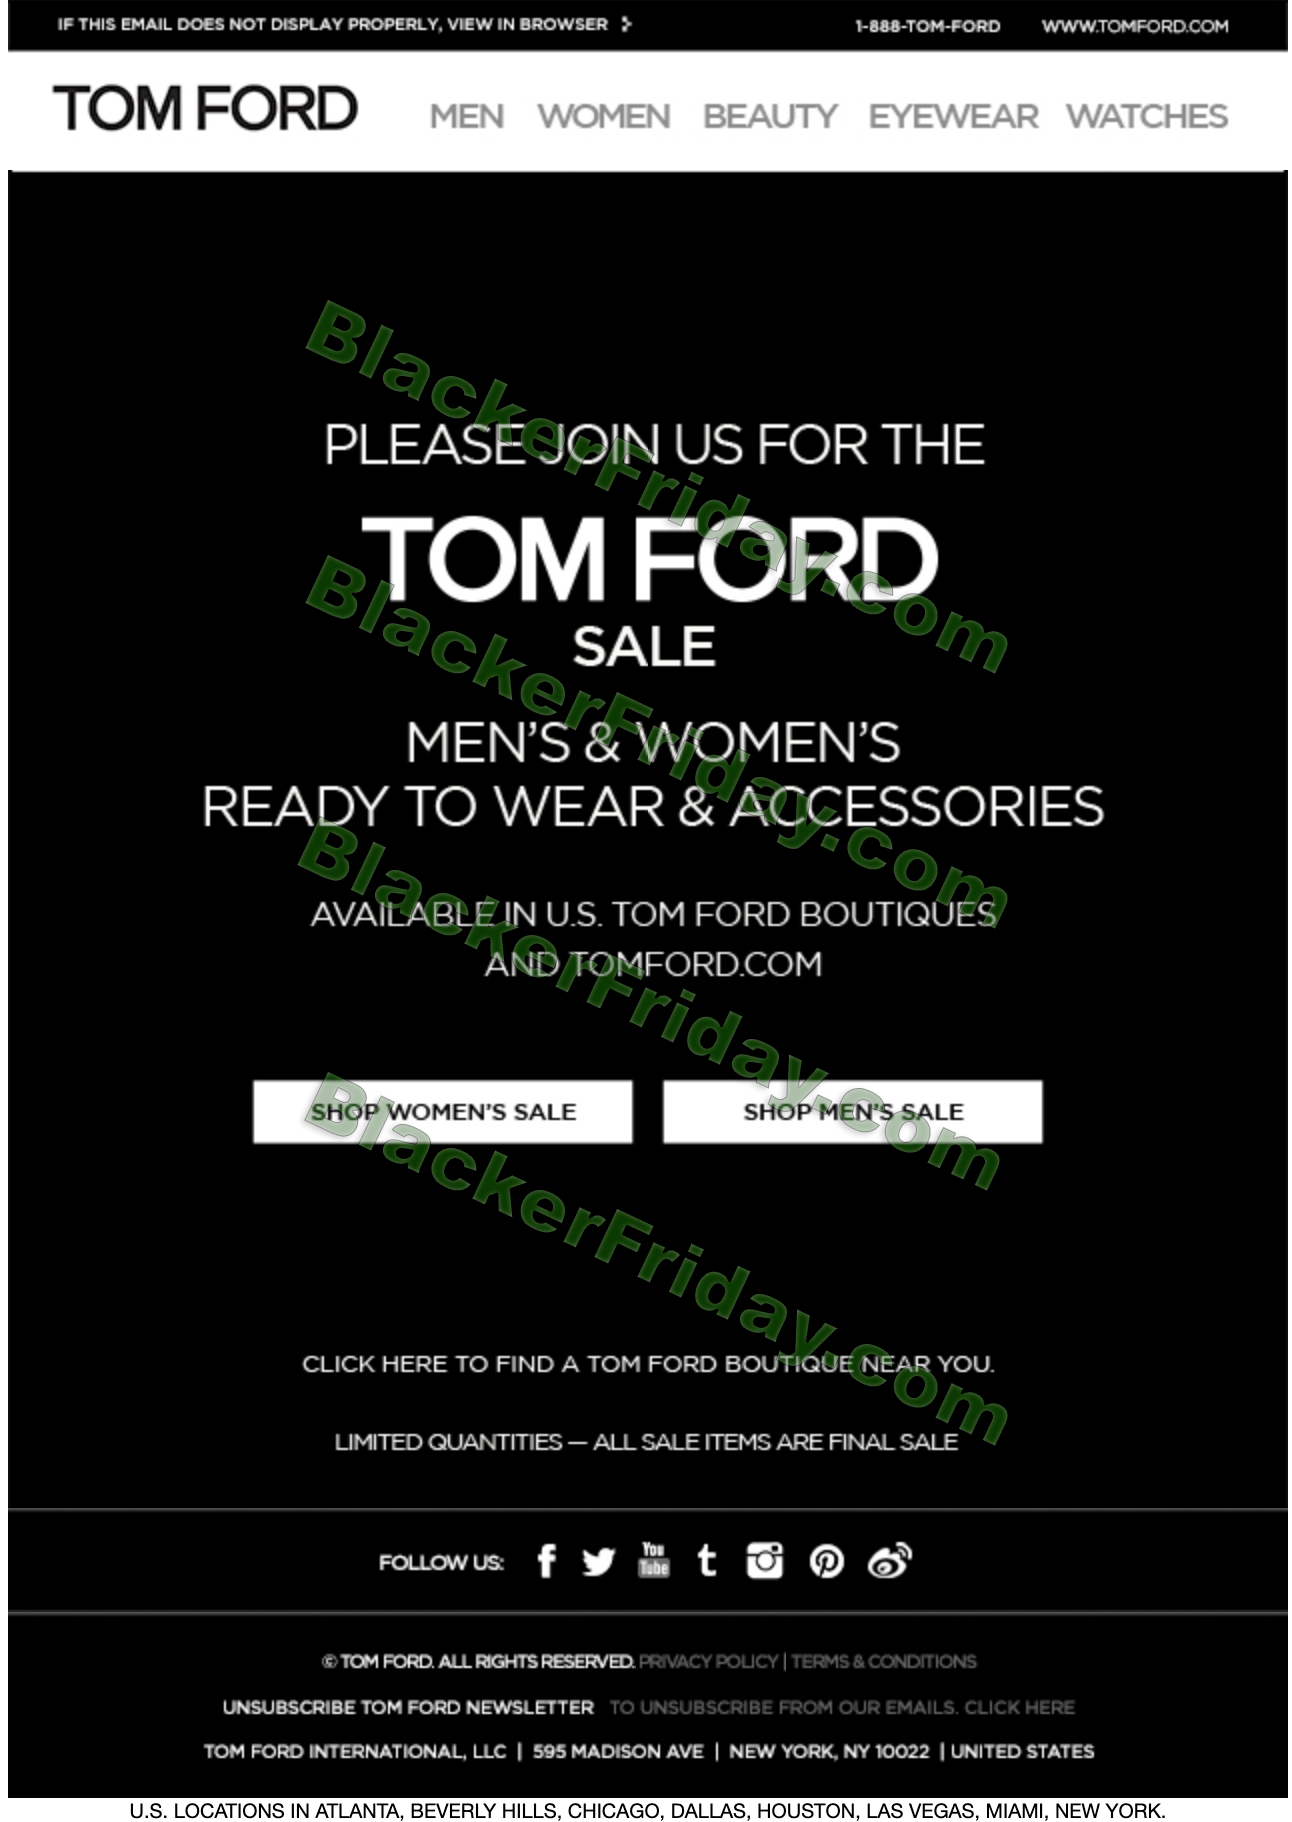 Tom Ford Black Friday 2020 Sale - What to Expect - Blacker Friday